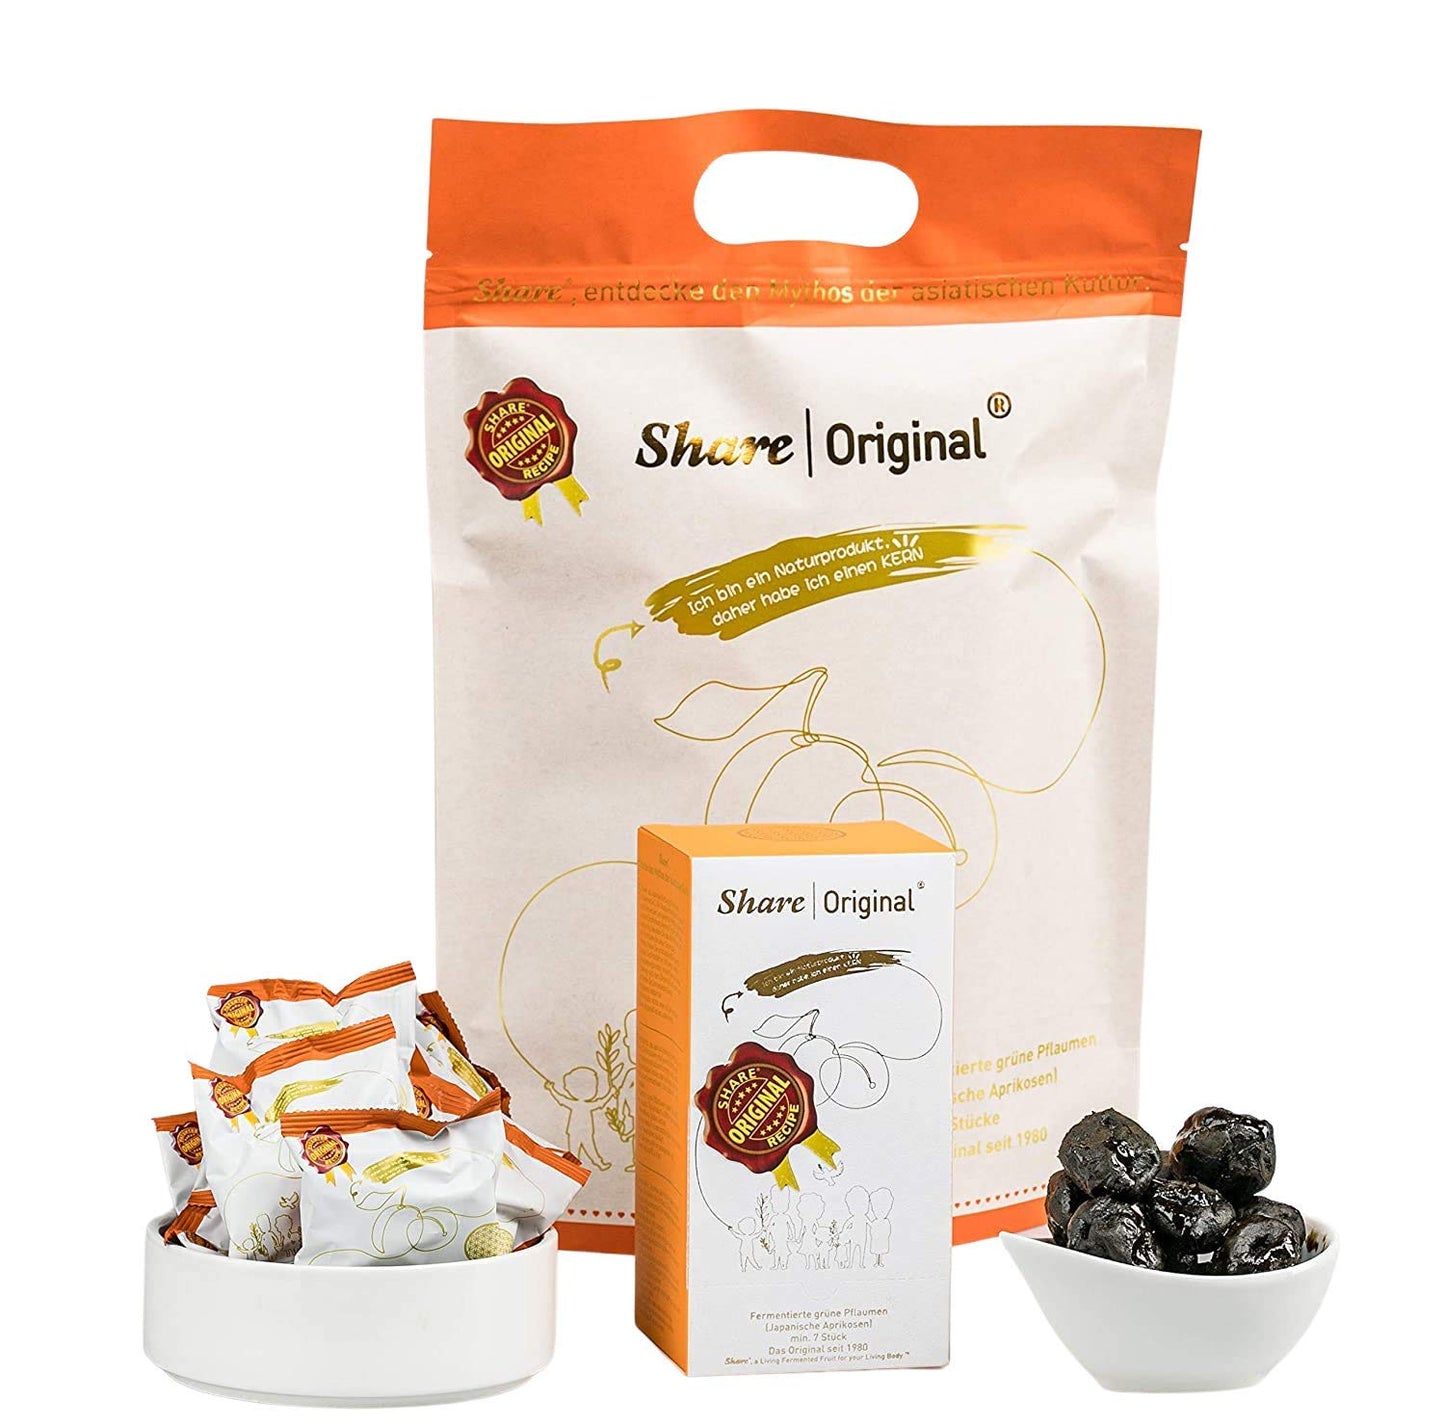 Share Original® (Organza Bag, 33 pieces): fermented Japanese apricot, effective natural alternative to lab-made laxatives and probiotics, 30-month natural fermented fruit, vegan & non-GMO, individually wrapped packet (made in Switzerland, free shipping)